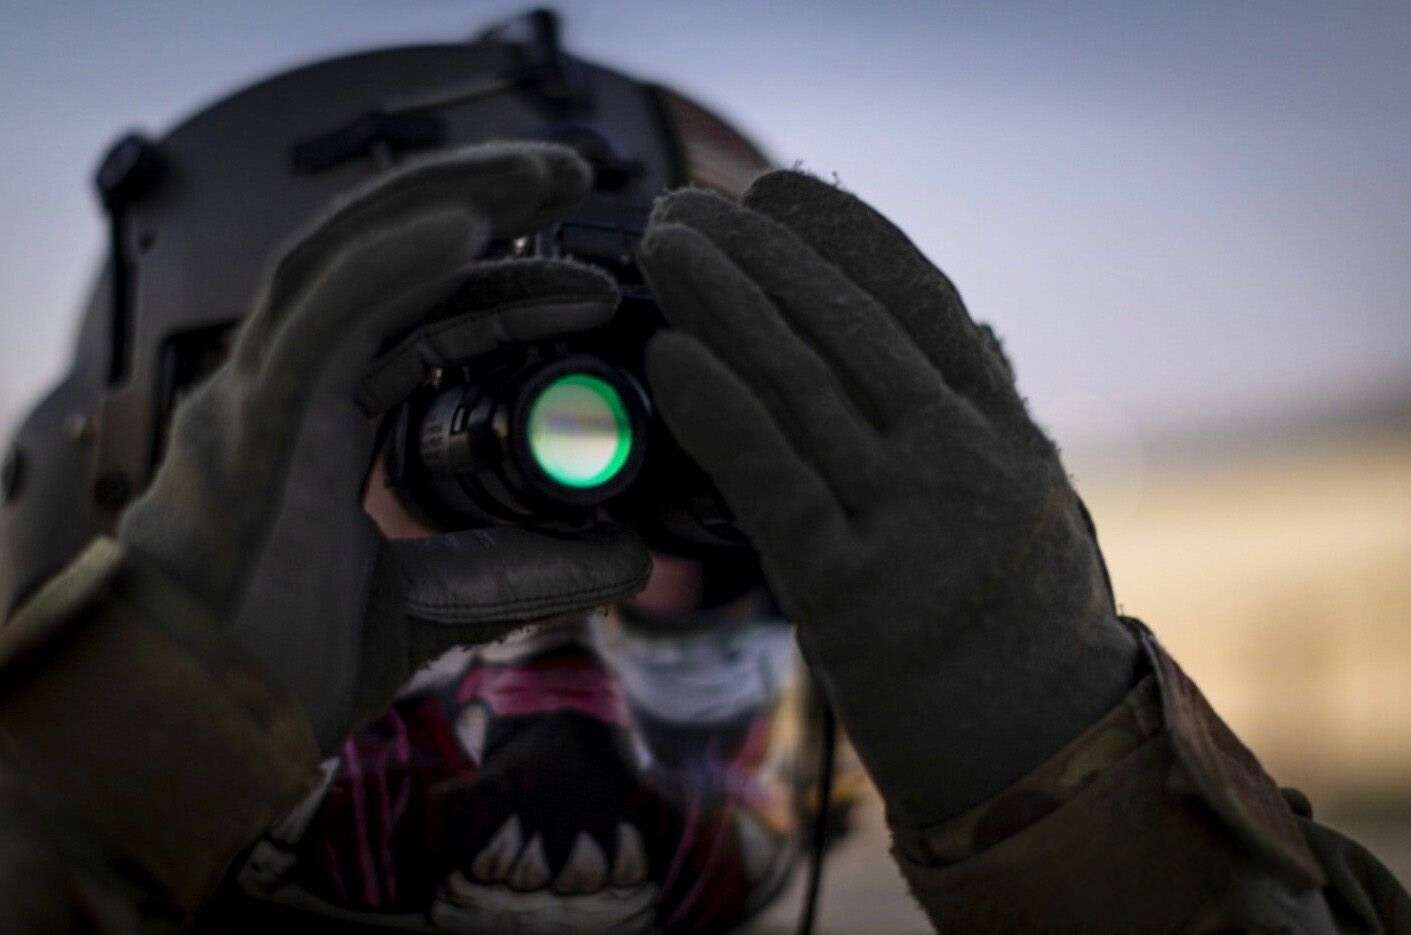 In the United States, civilians can legally purchase and use night vision equipment without any kind of permit or license.